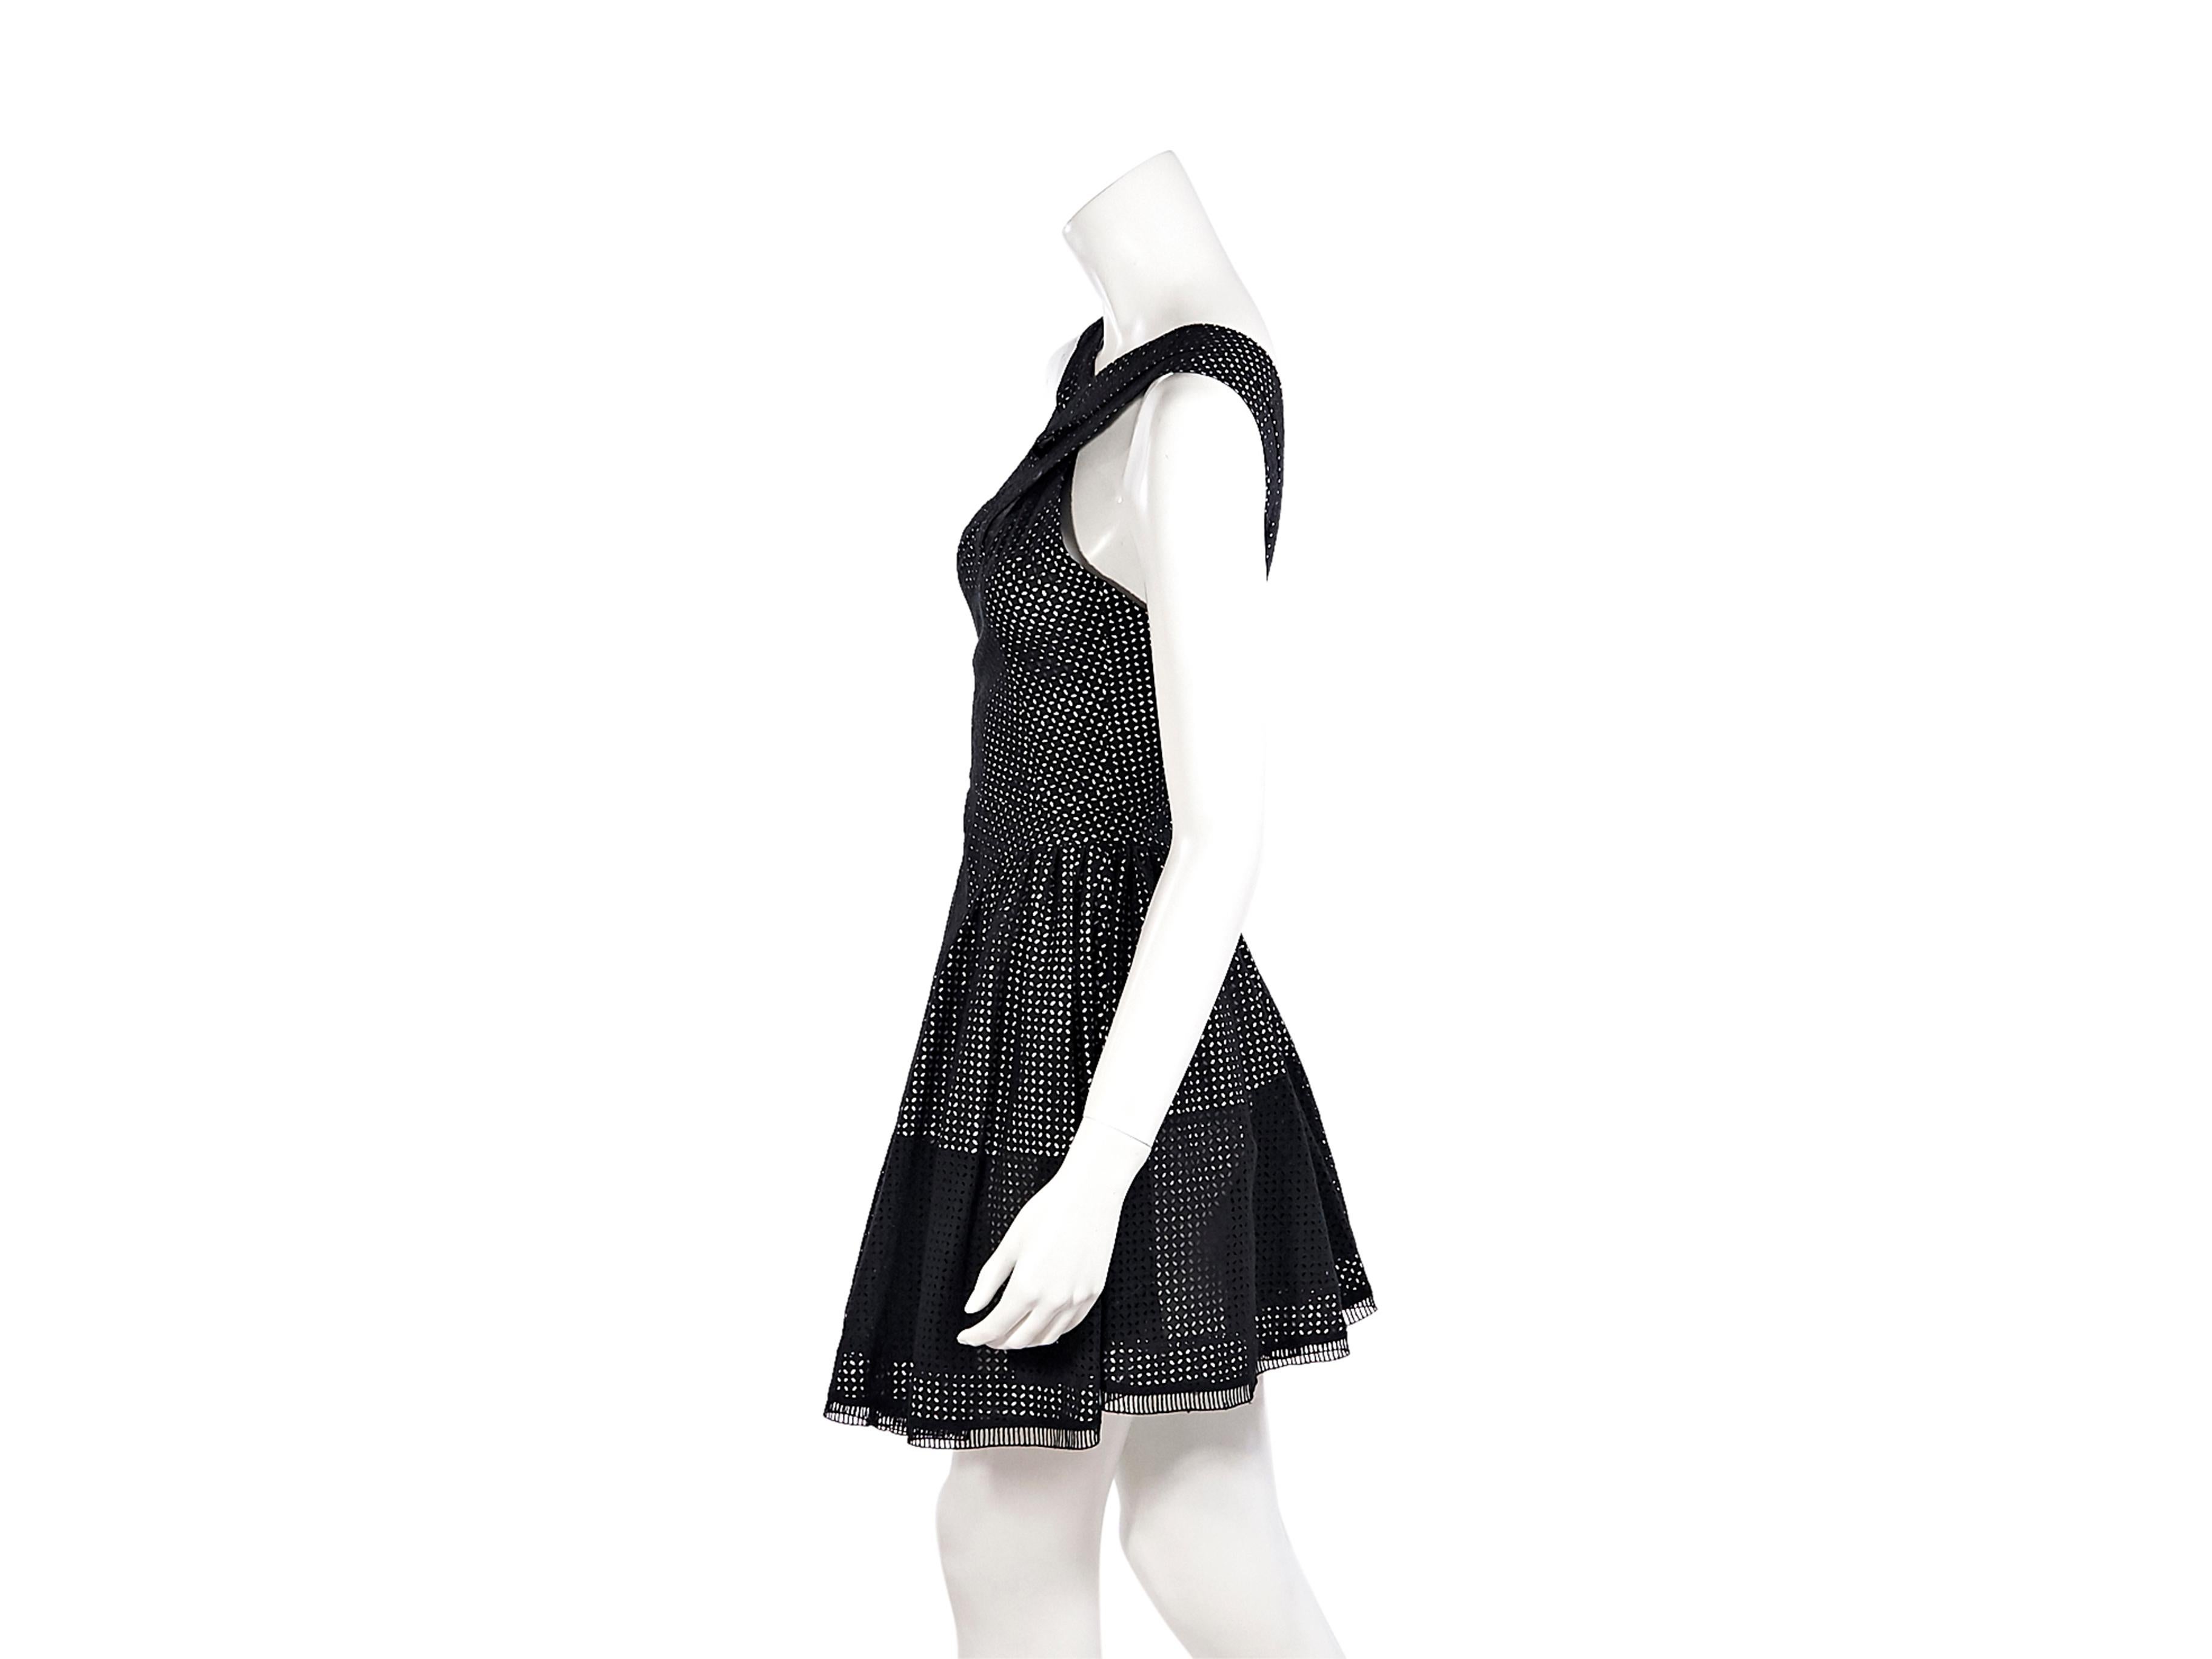 Product details:  Black and white eyelet cotton fit-and-flare dress by Alaia.  V-neck.  Sleeveless.  Concealed back zip closure.  Label size FR 36.  32